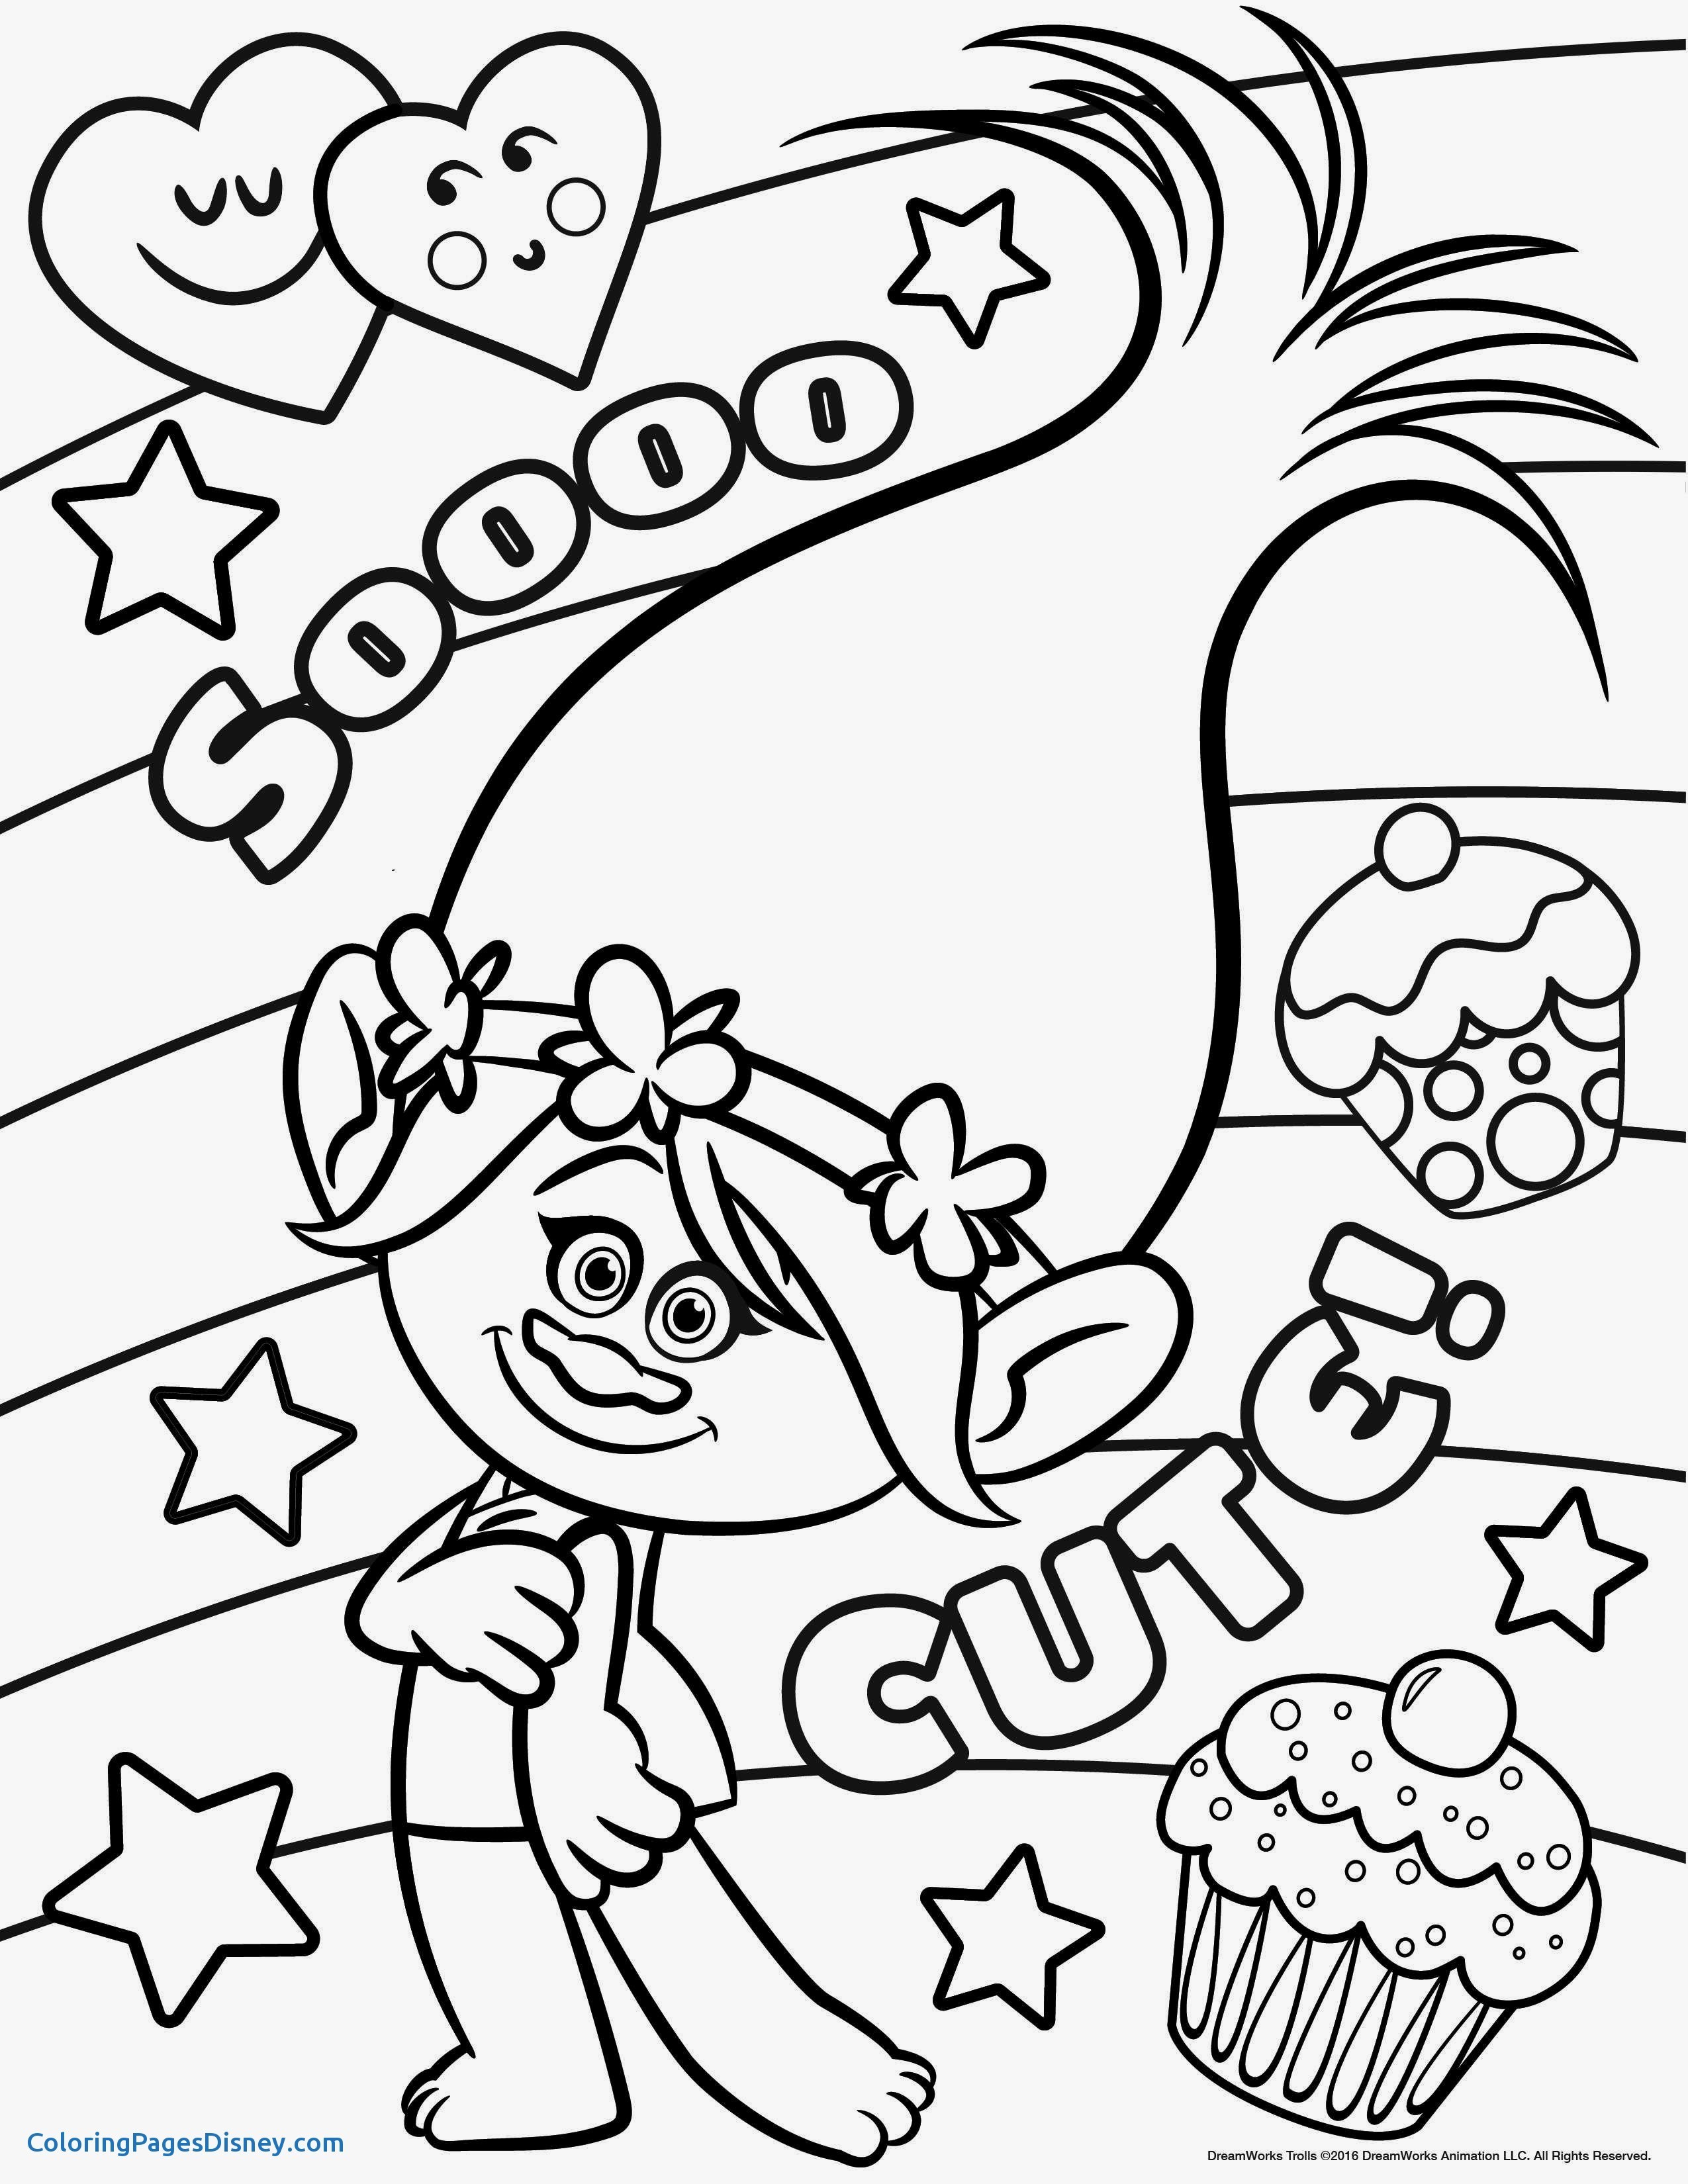 Coloring Pages Trolls Fresh Branch & Poppy From Trolls Coloring Page ...